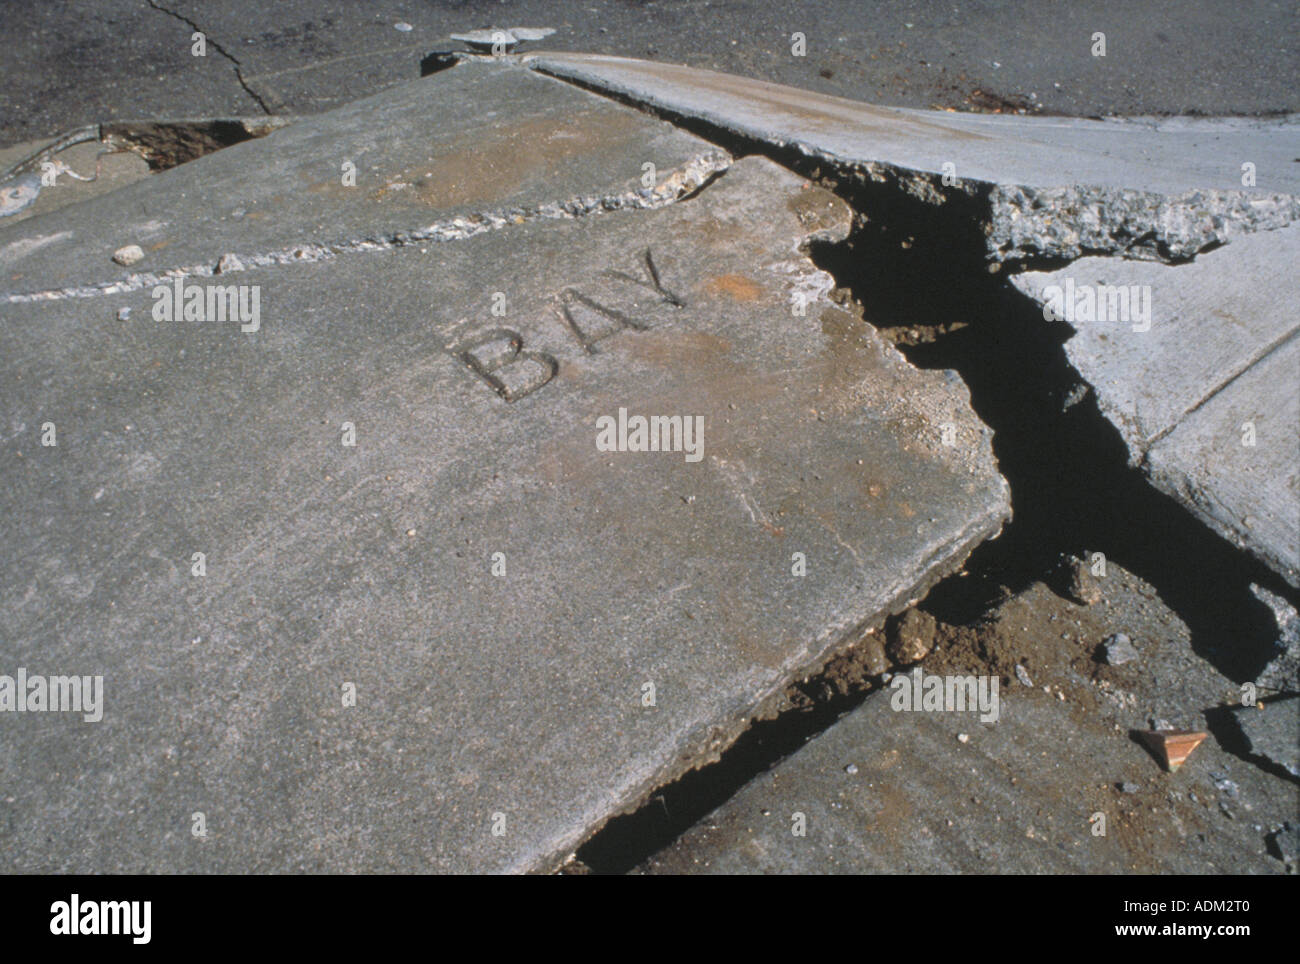 Ruptured sidewalk on Bay Street, San Francisco after the 1989 earthquake Stock Photo